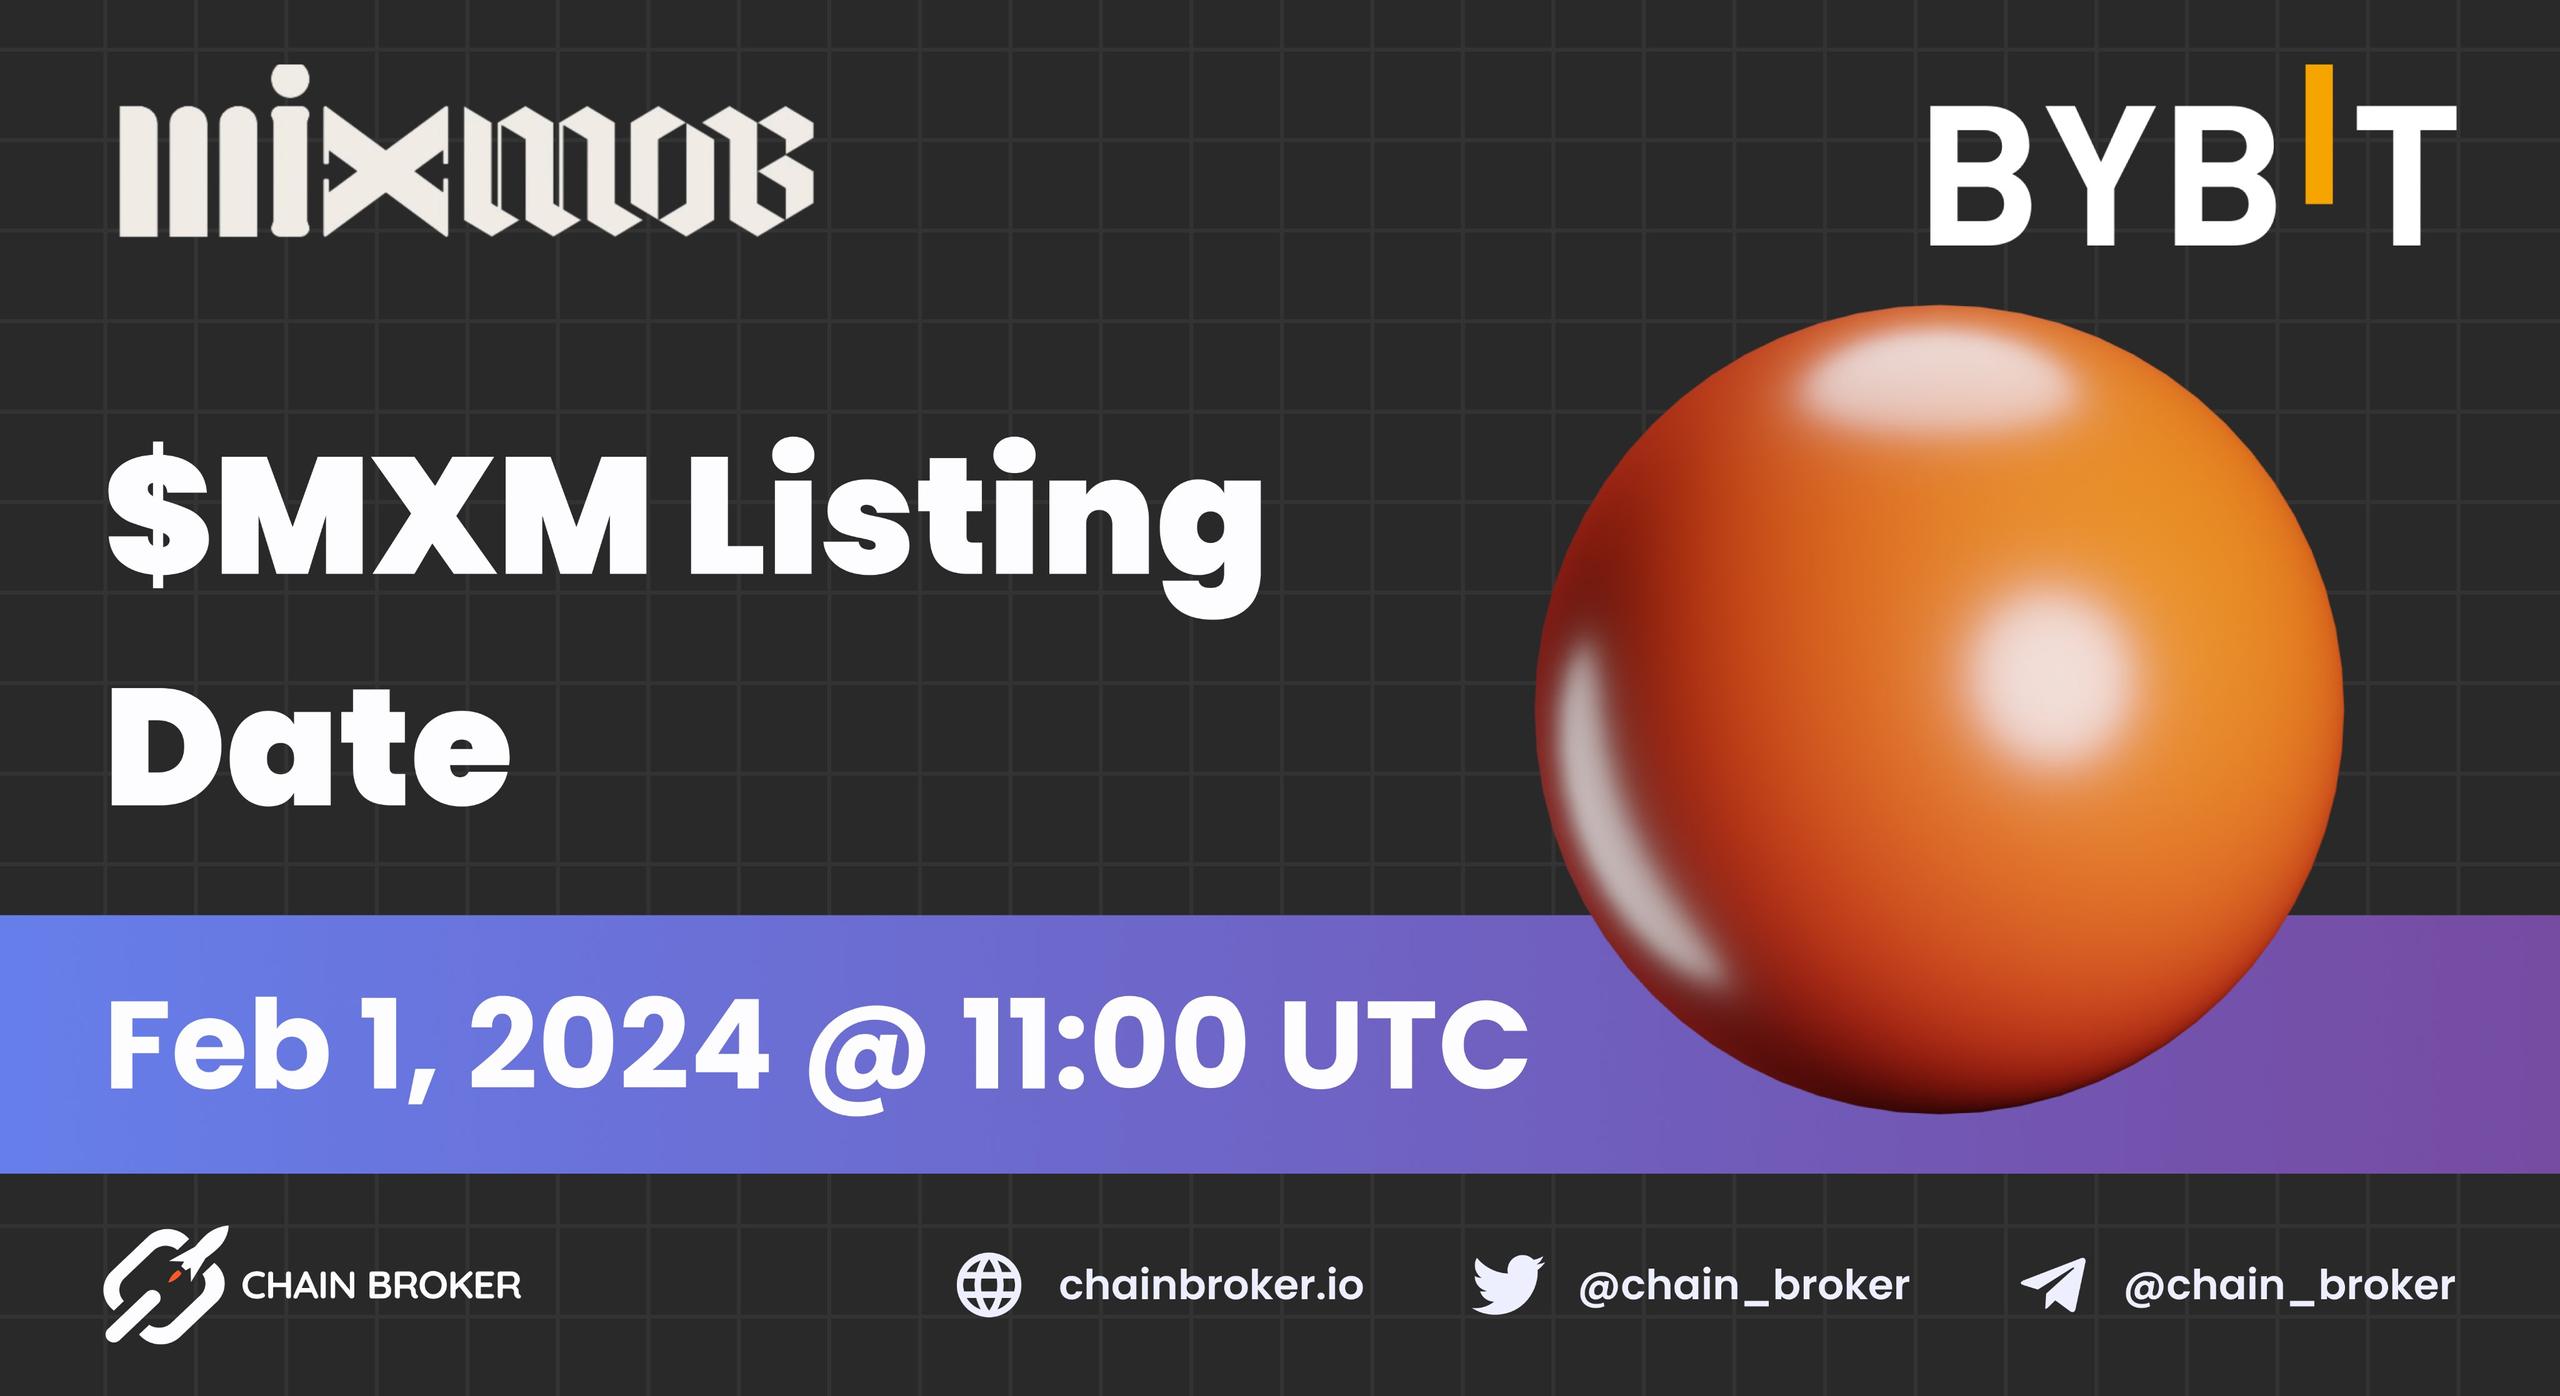 Mixmob will be listed on Bybit